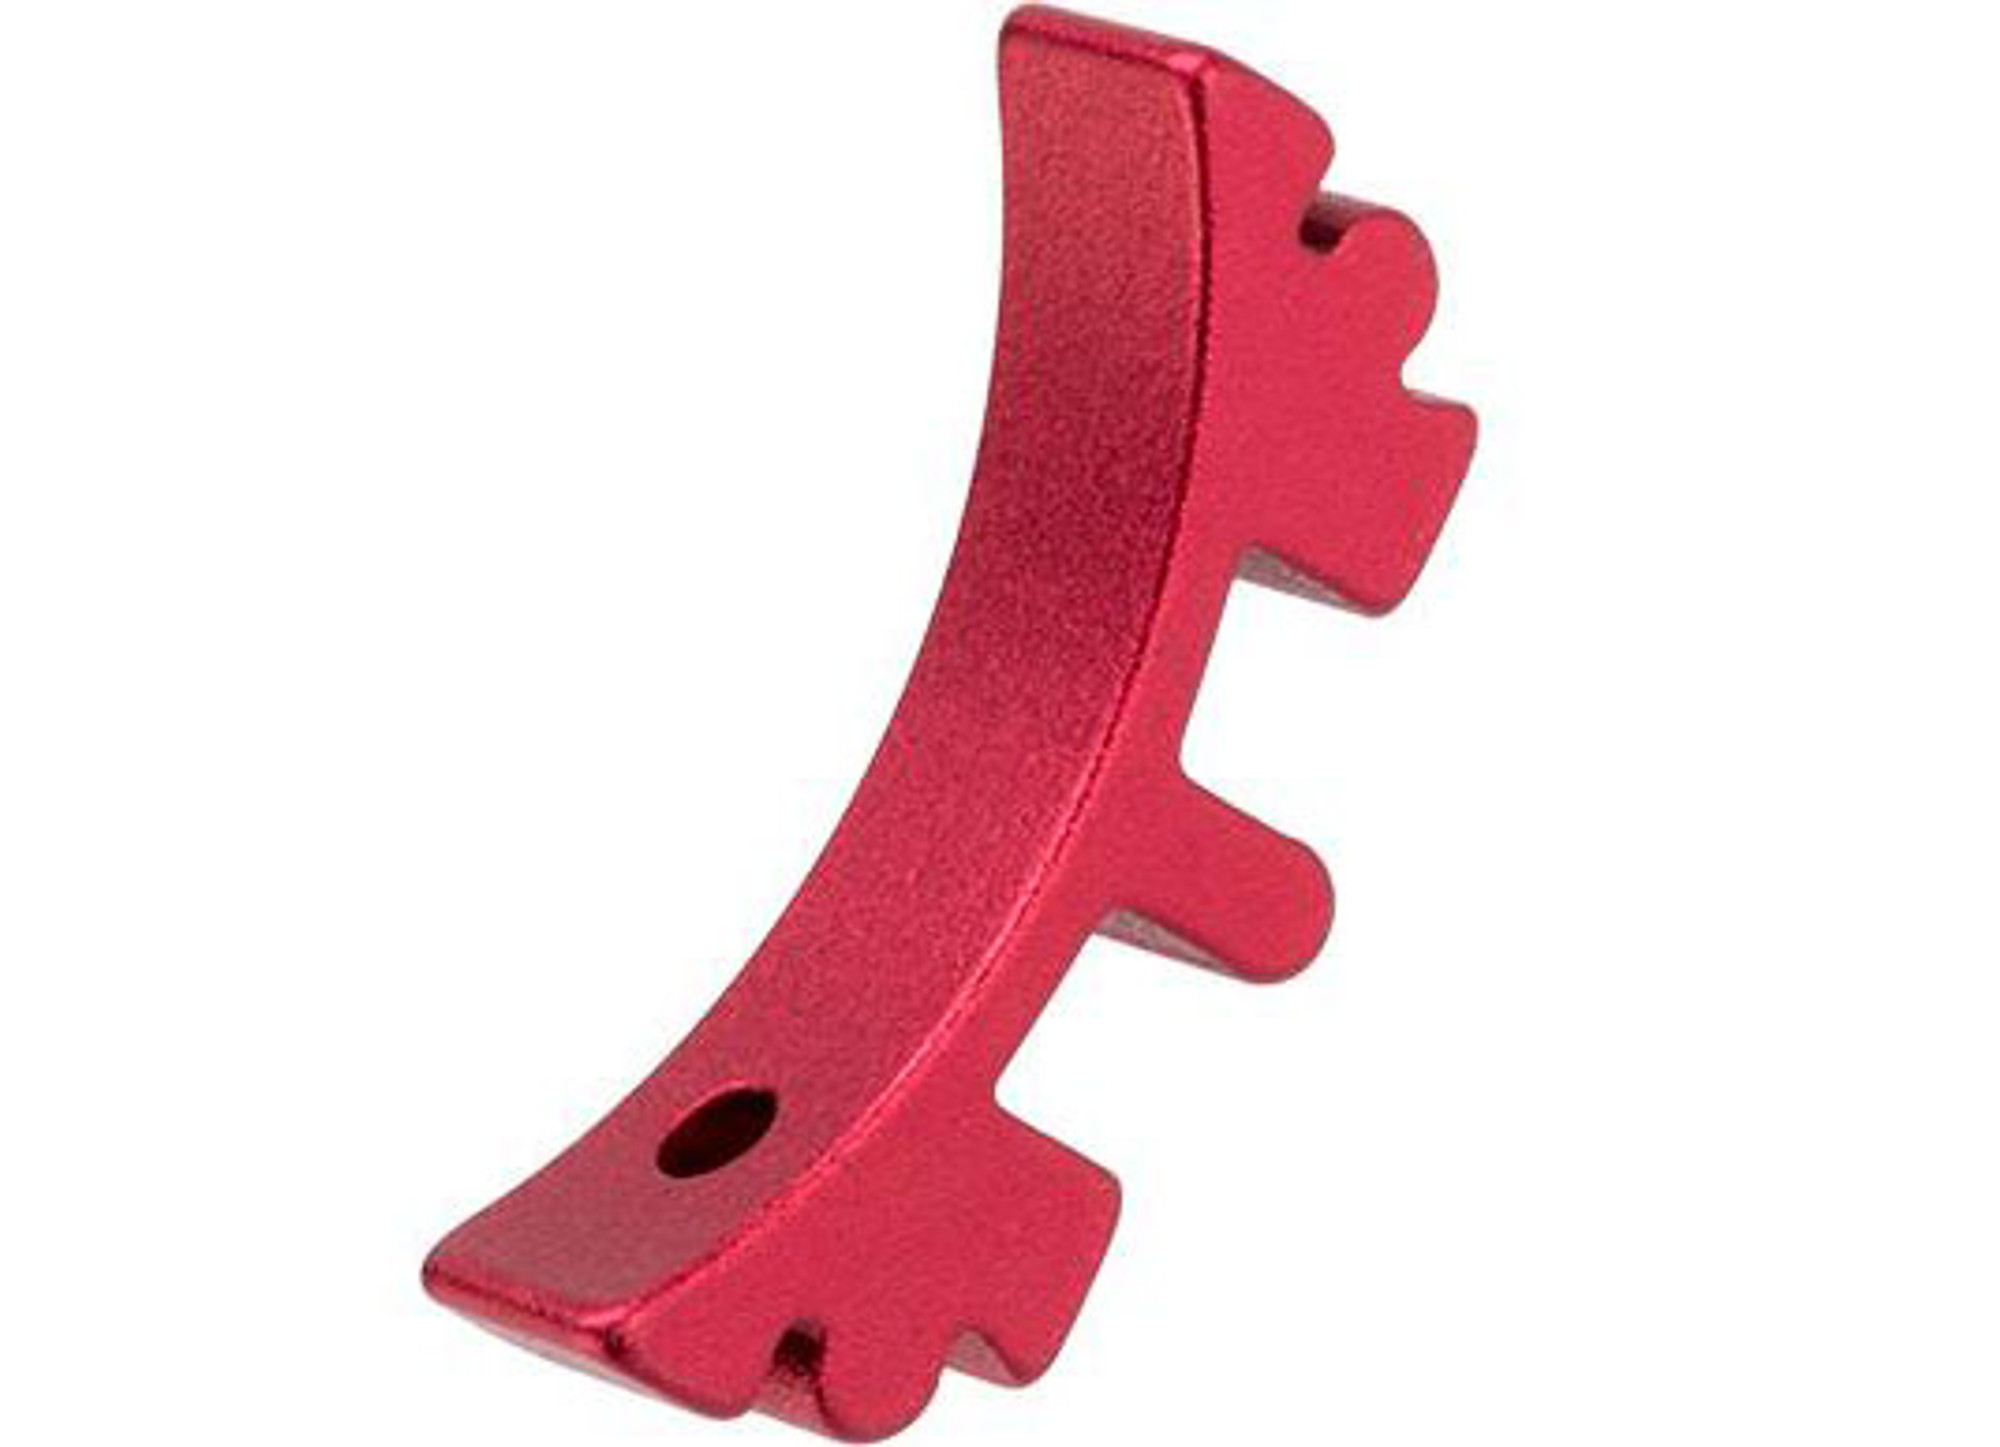 Airsoft Masterpiece Aluminum Puzzle Trigger - Curved Short (Color: Red)